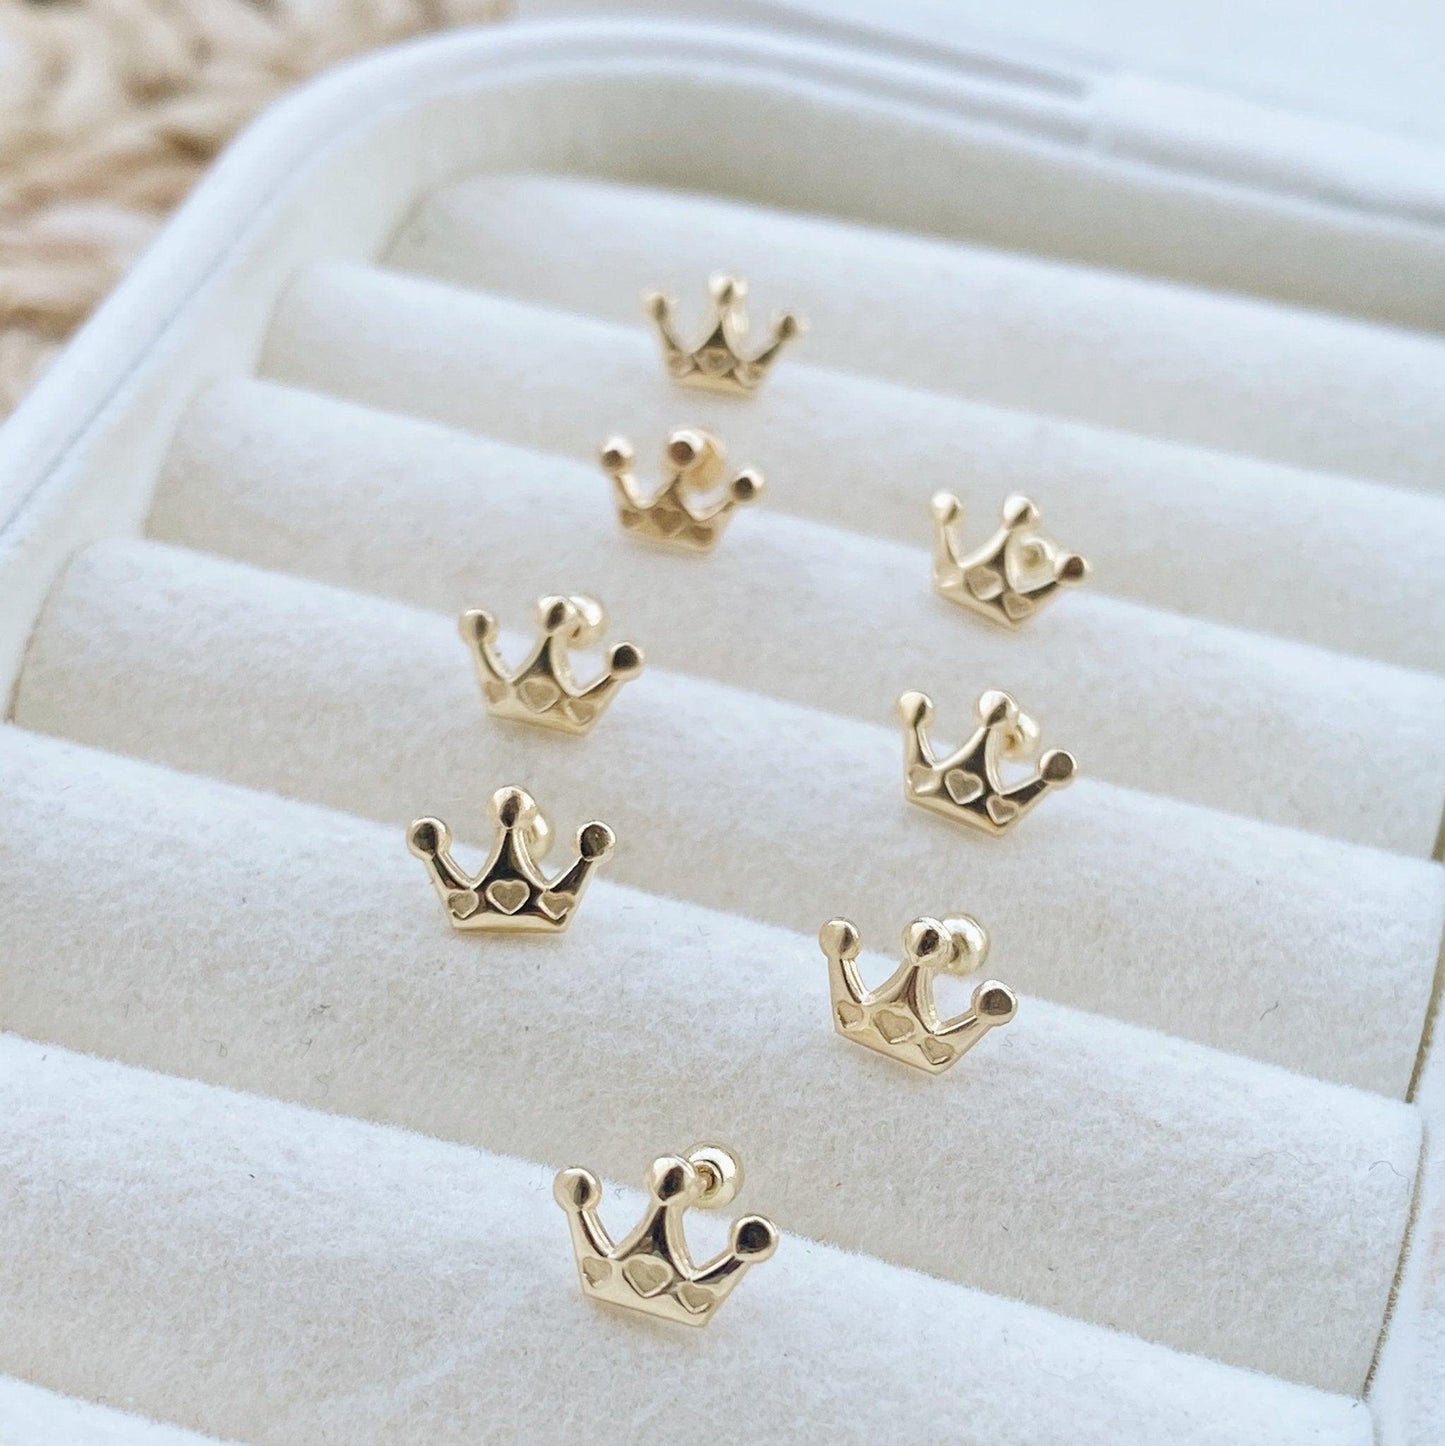 Are you a queen? Why not wear crowns everyday with our new collection of Crown stud earrings. These gold crown stud earrings are perfect to show your regal spirit wherever you go.